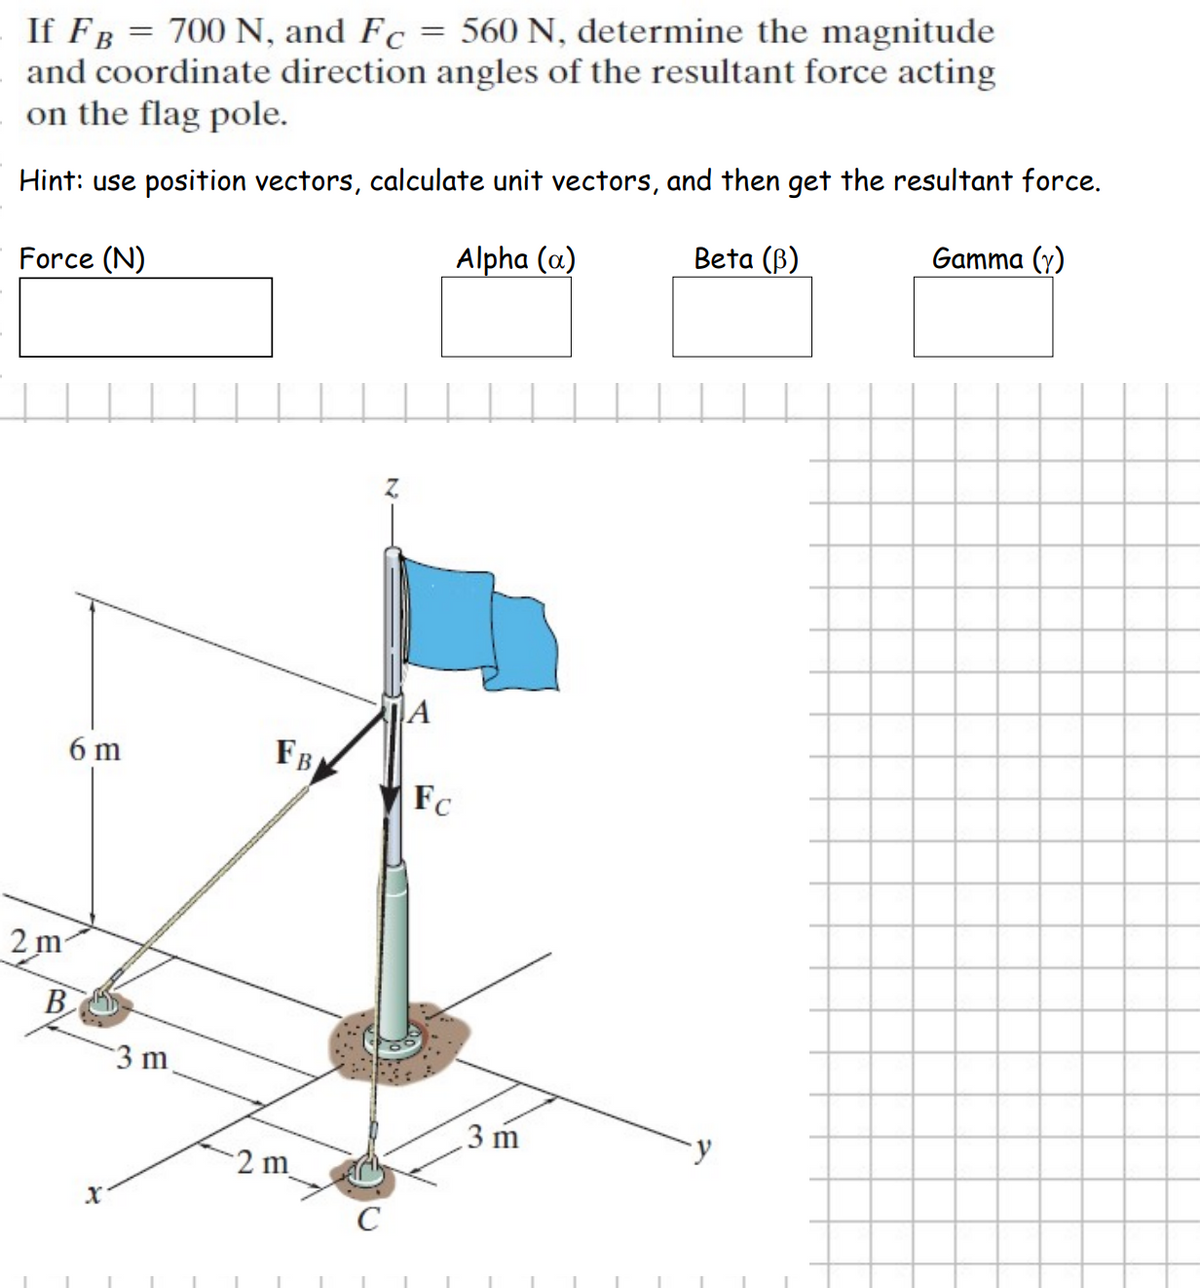 If FB = 700 N, and Fc
and coordinate direction angles of the resultant force acting
on the flag pole.
560 N, determine the magnitude
Hint: use position vectors, calculate unit vectors, and then get the resultant force.
Gamma (y)
Beta (B)
Alpha (a)
Force (N)
6 m
FB
Fc
2m-
B.
3 m
3 m
2 m
C
